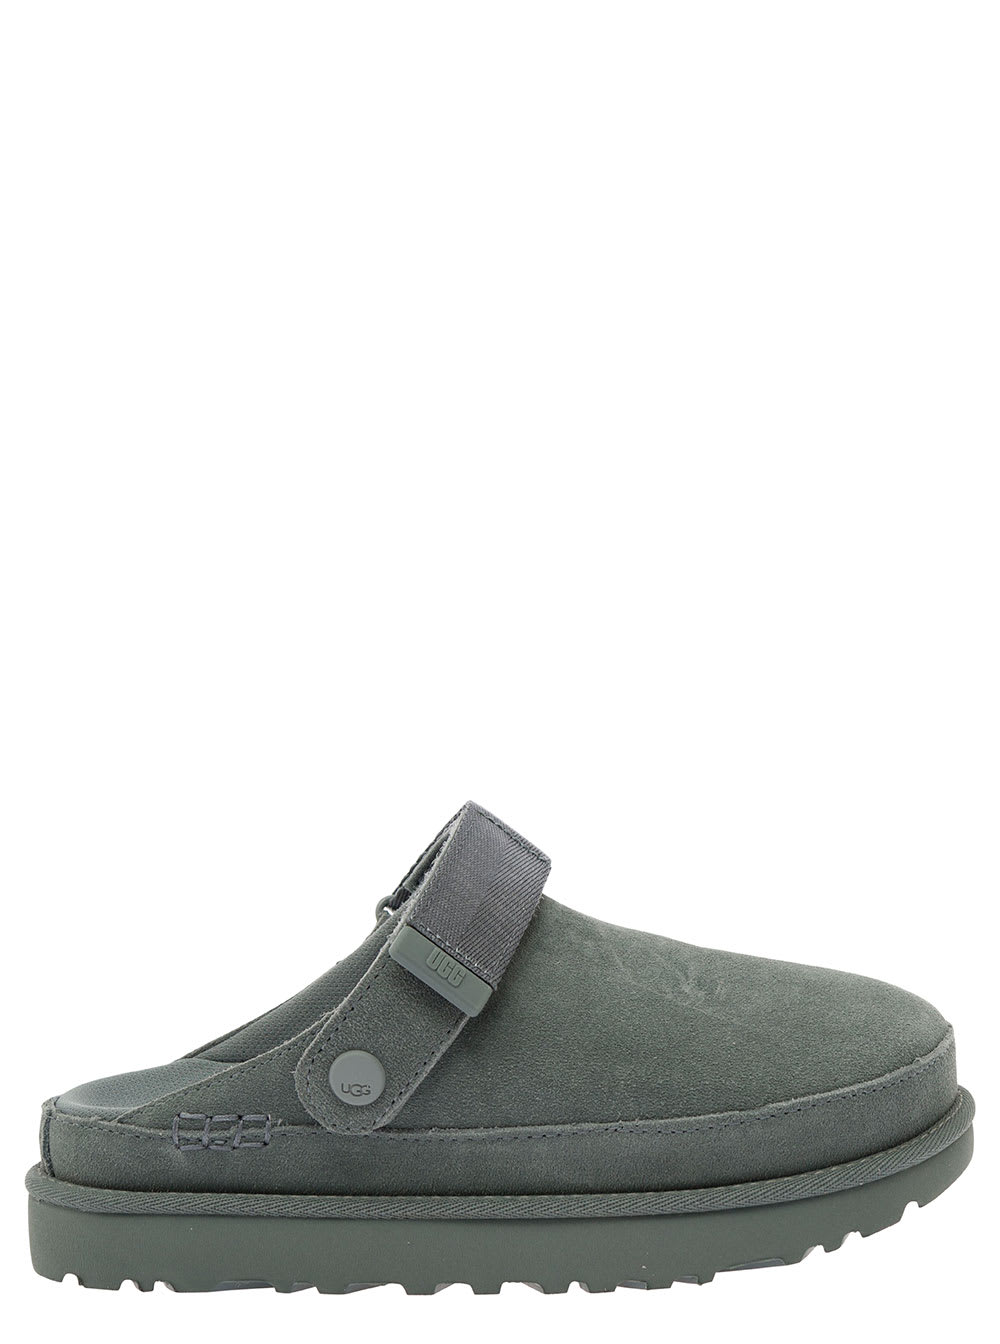 UGG GOLDENSTAR GREY CLOG WITH EMBOSSED LOGO IN SUEDE WOMAN